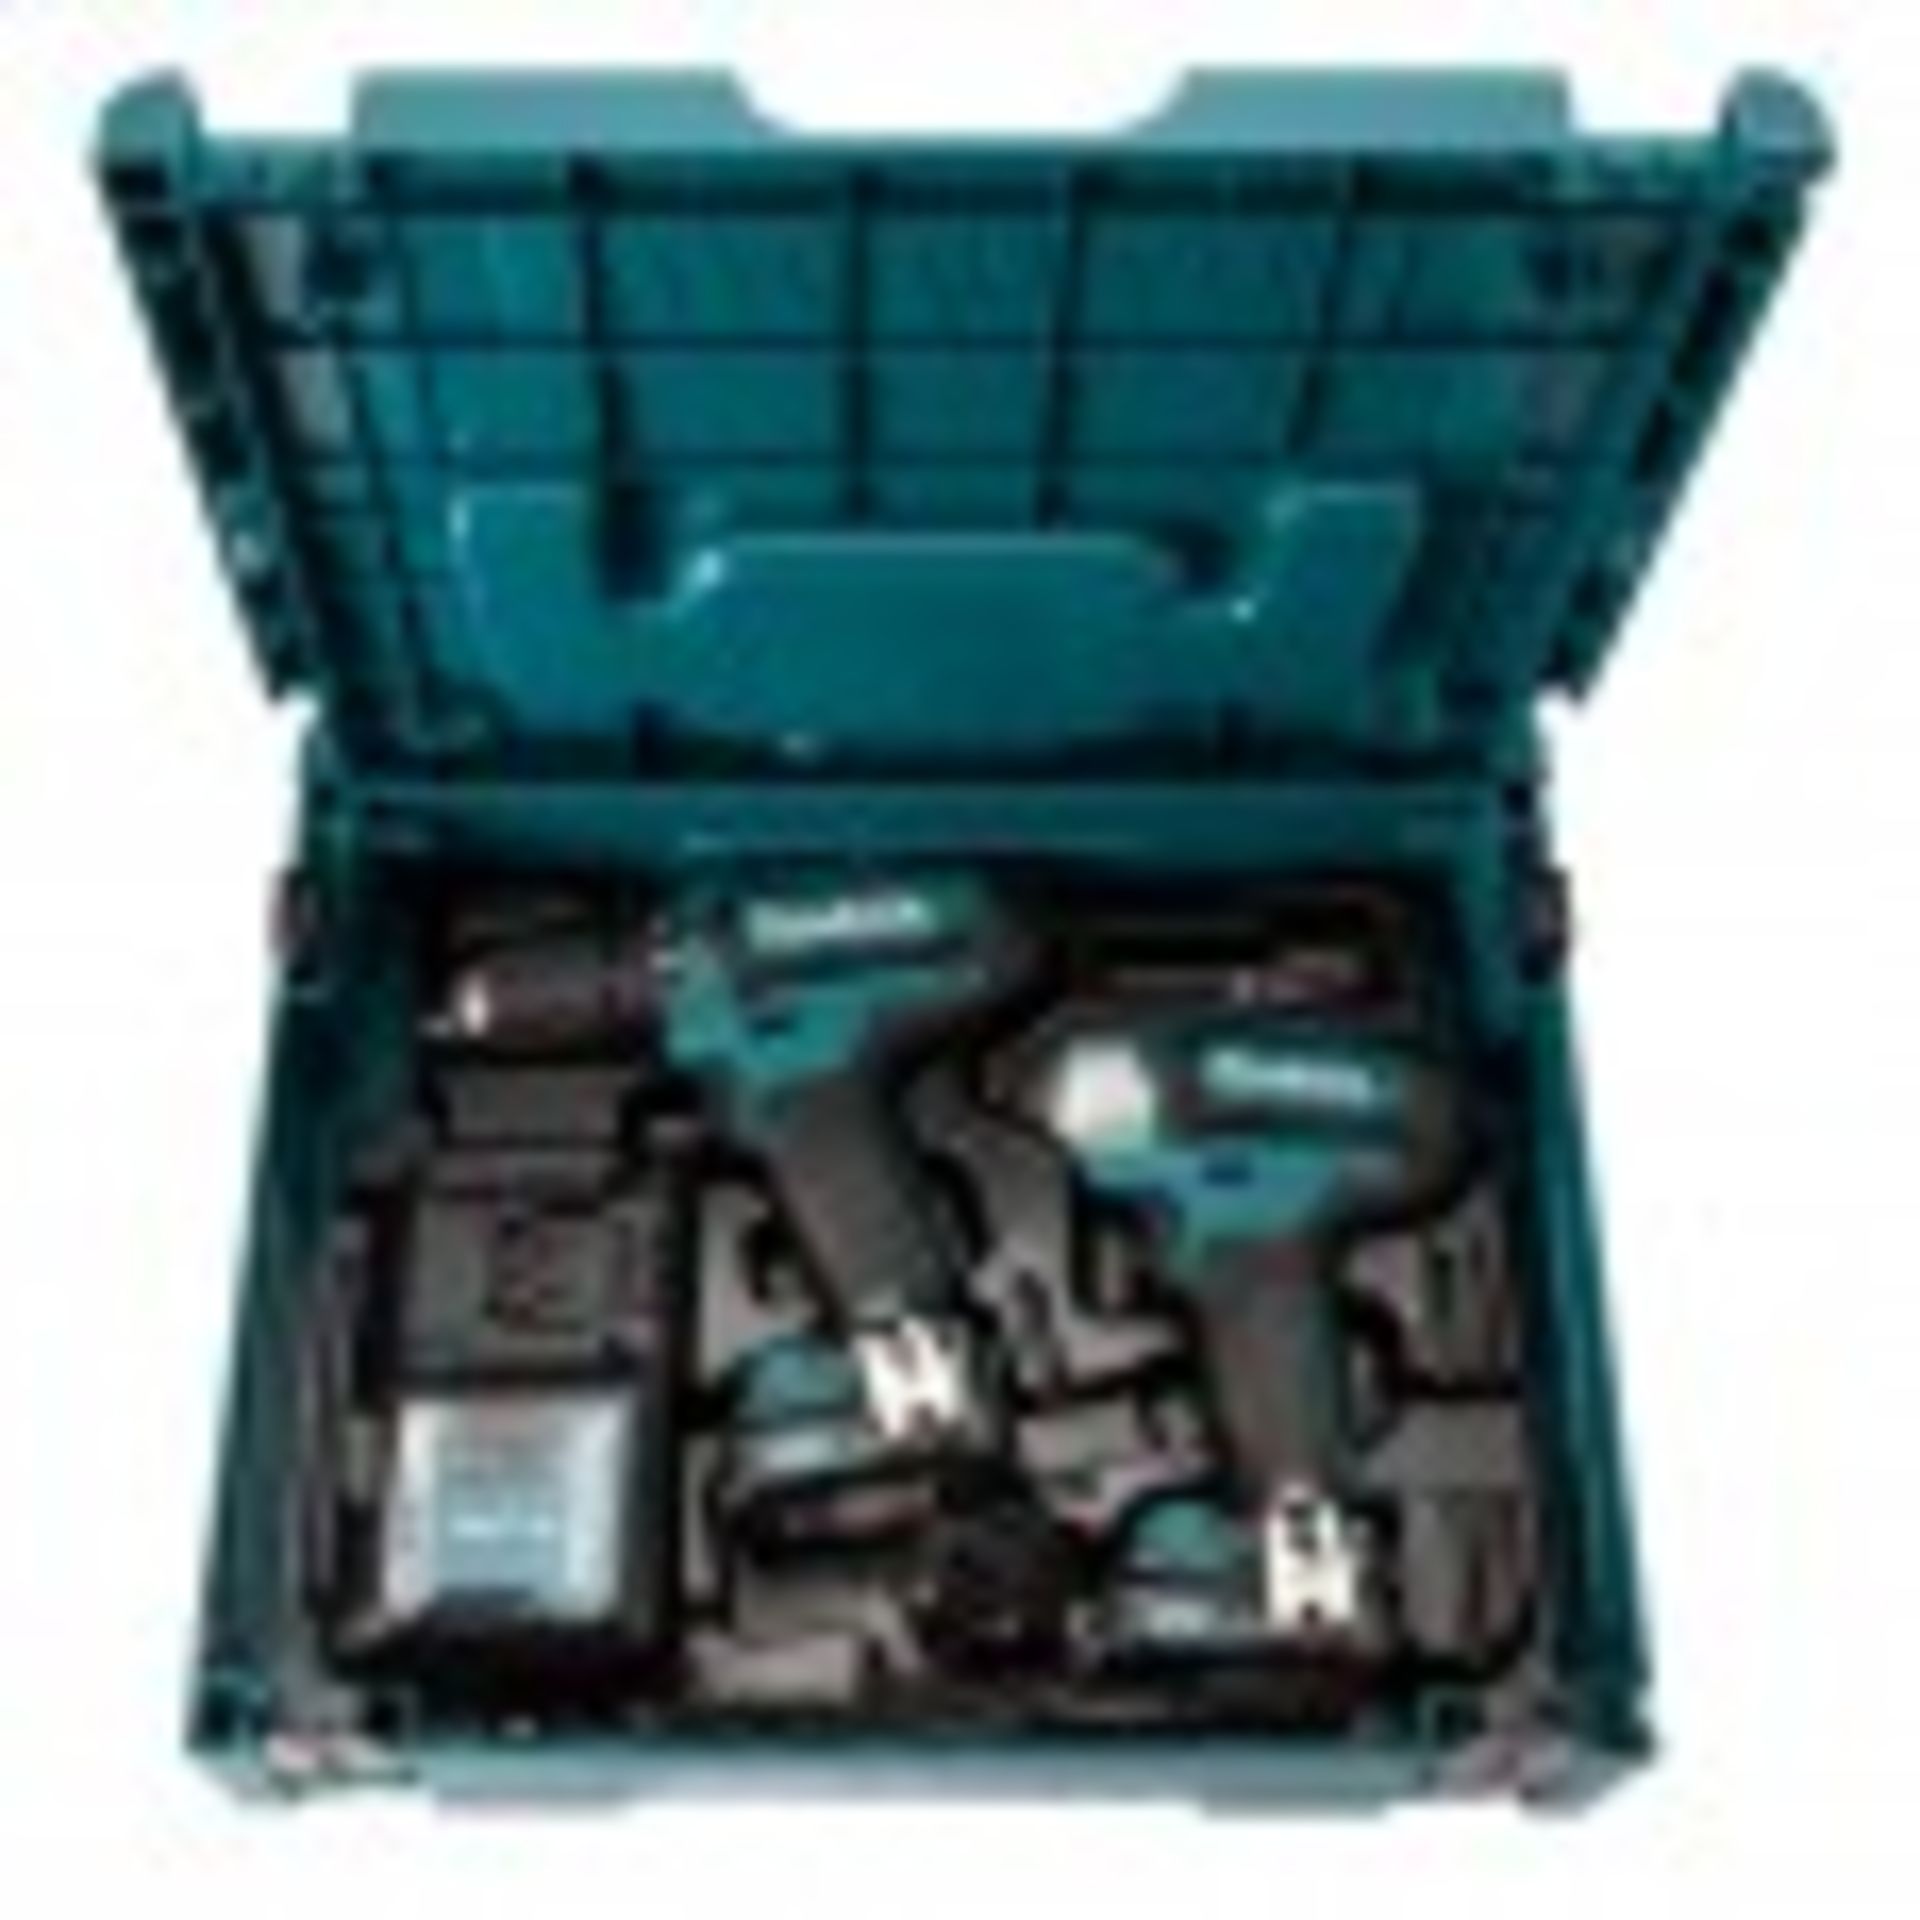 V Brand New Makita Twin Drill And Driver Set - Includes 2 Batteries And Charger/Case Etc - 10.8V ( - Image 2 of 2